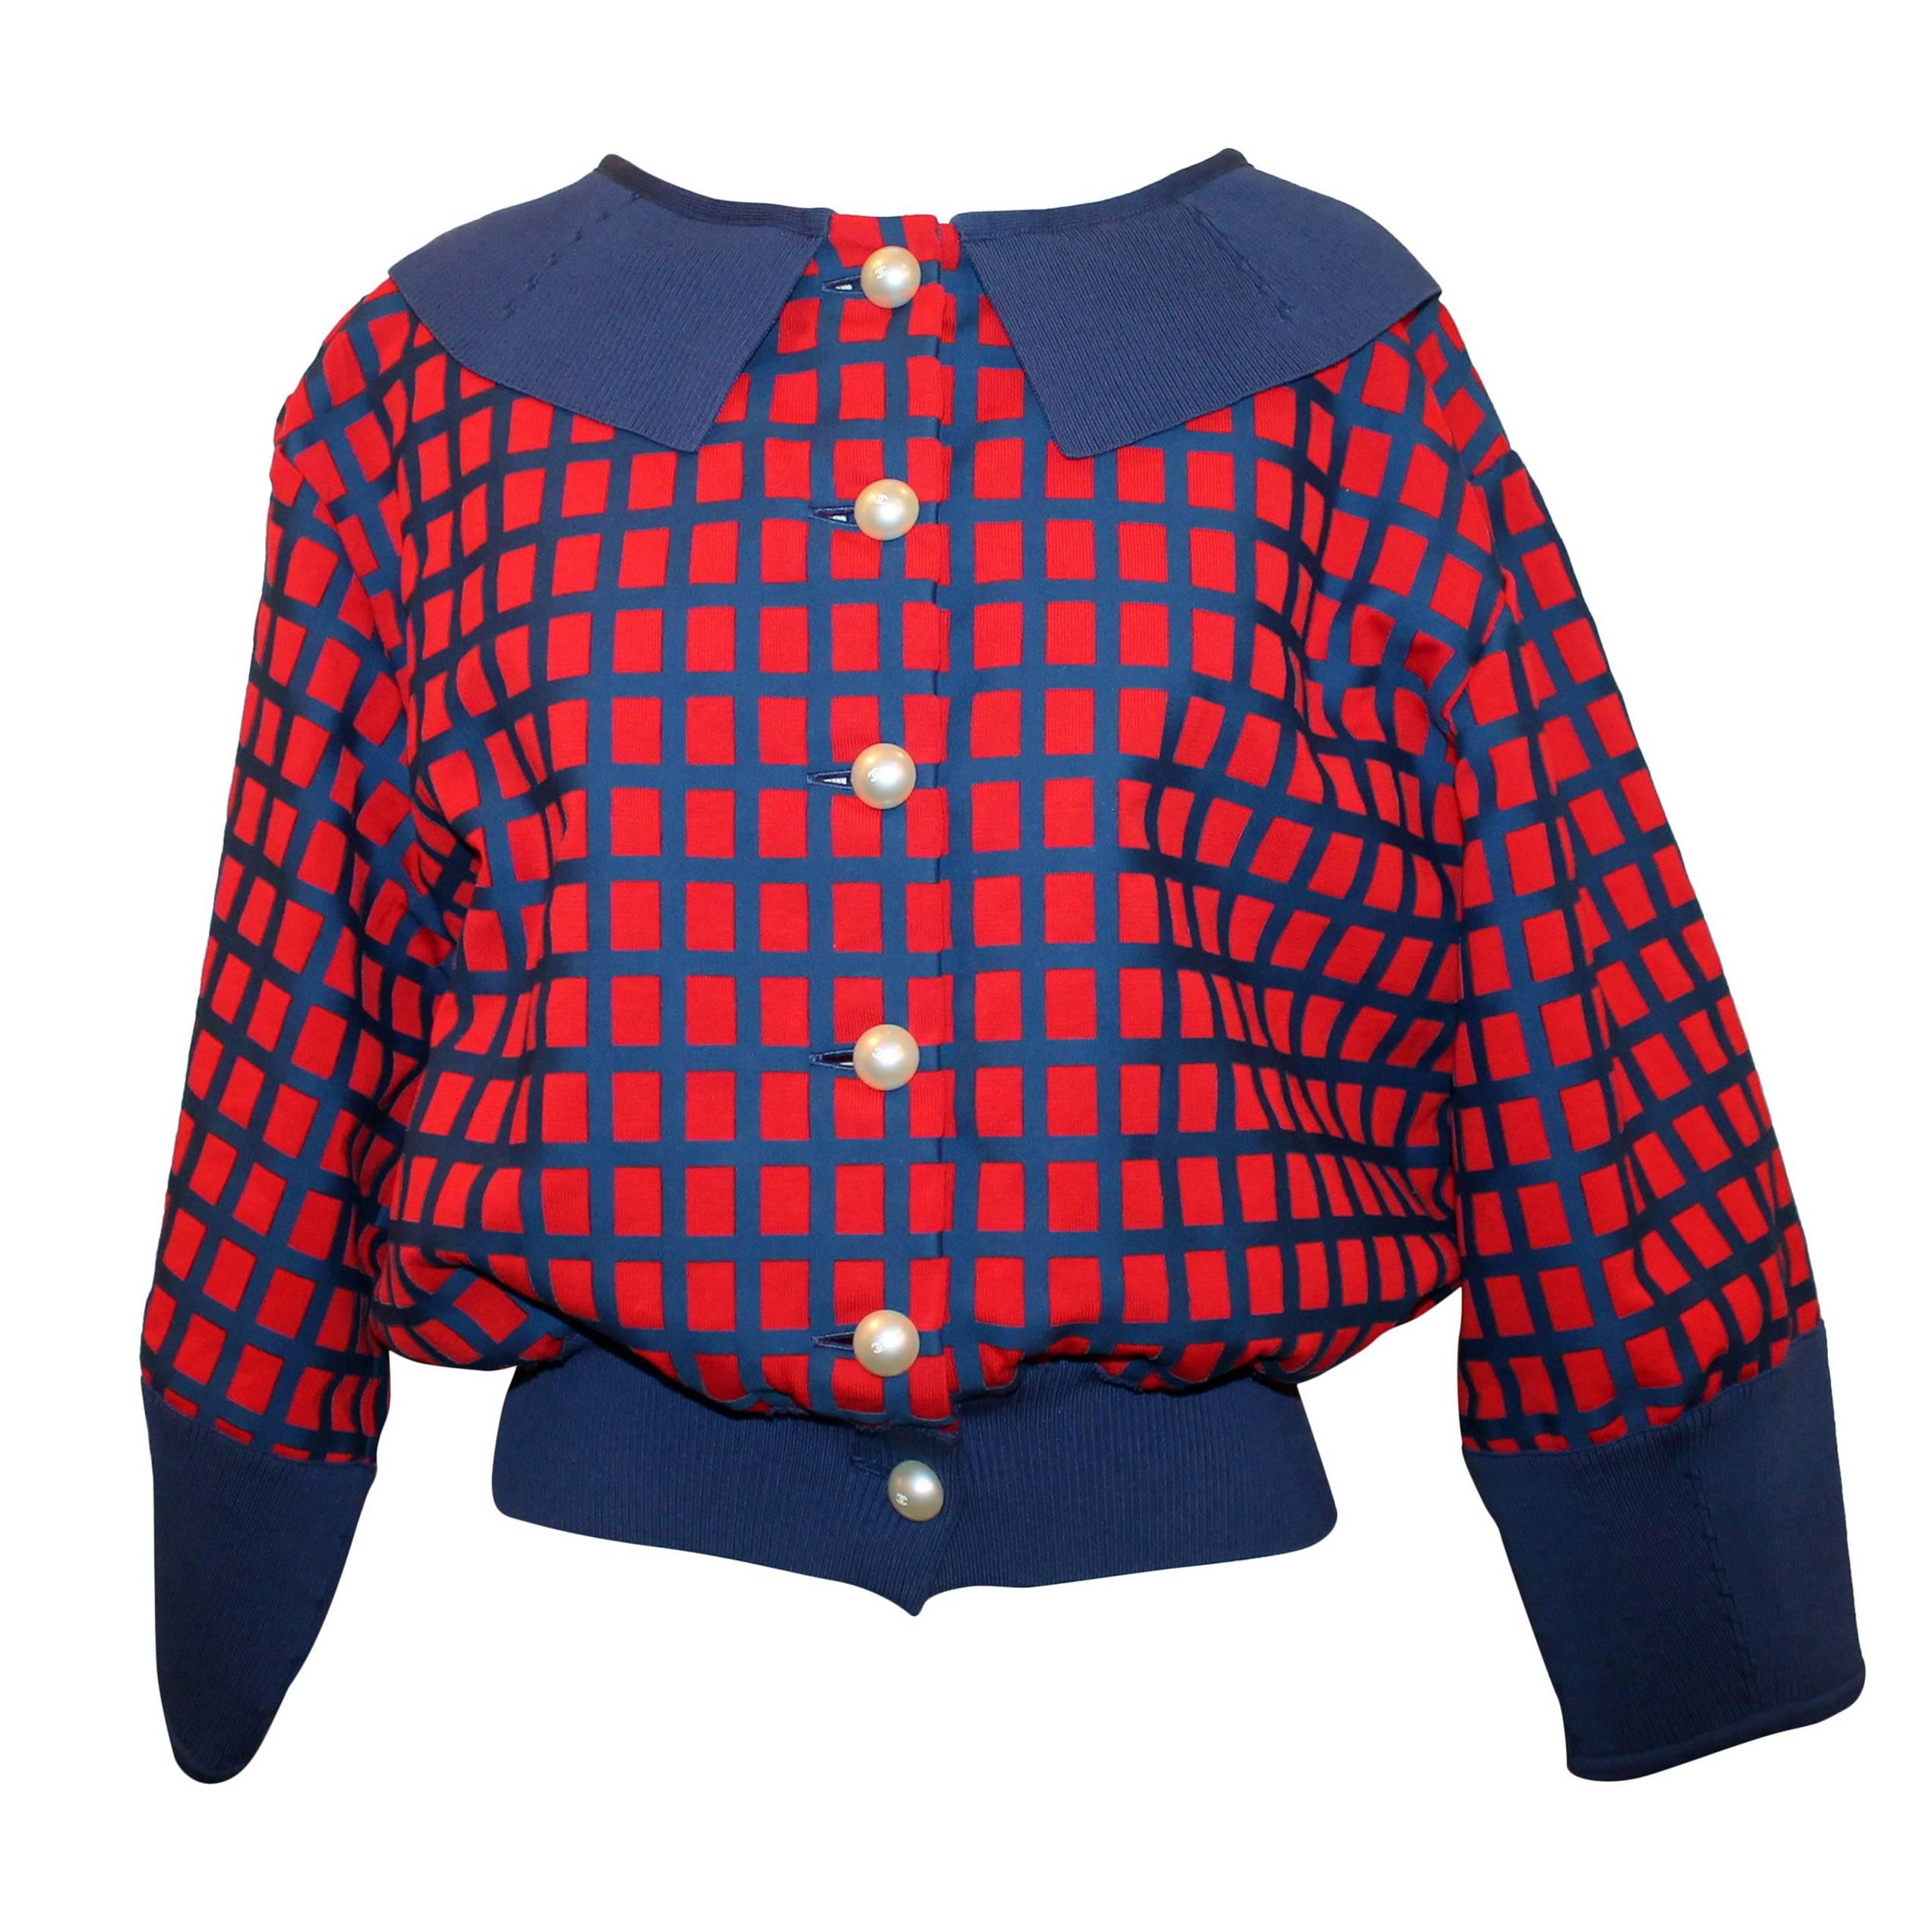 Chanel Red and Blue Windowpane Print Jacket w/ Pearl Buttons - 42